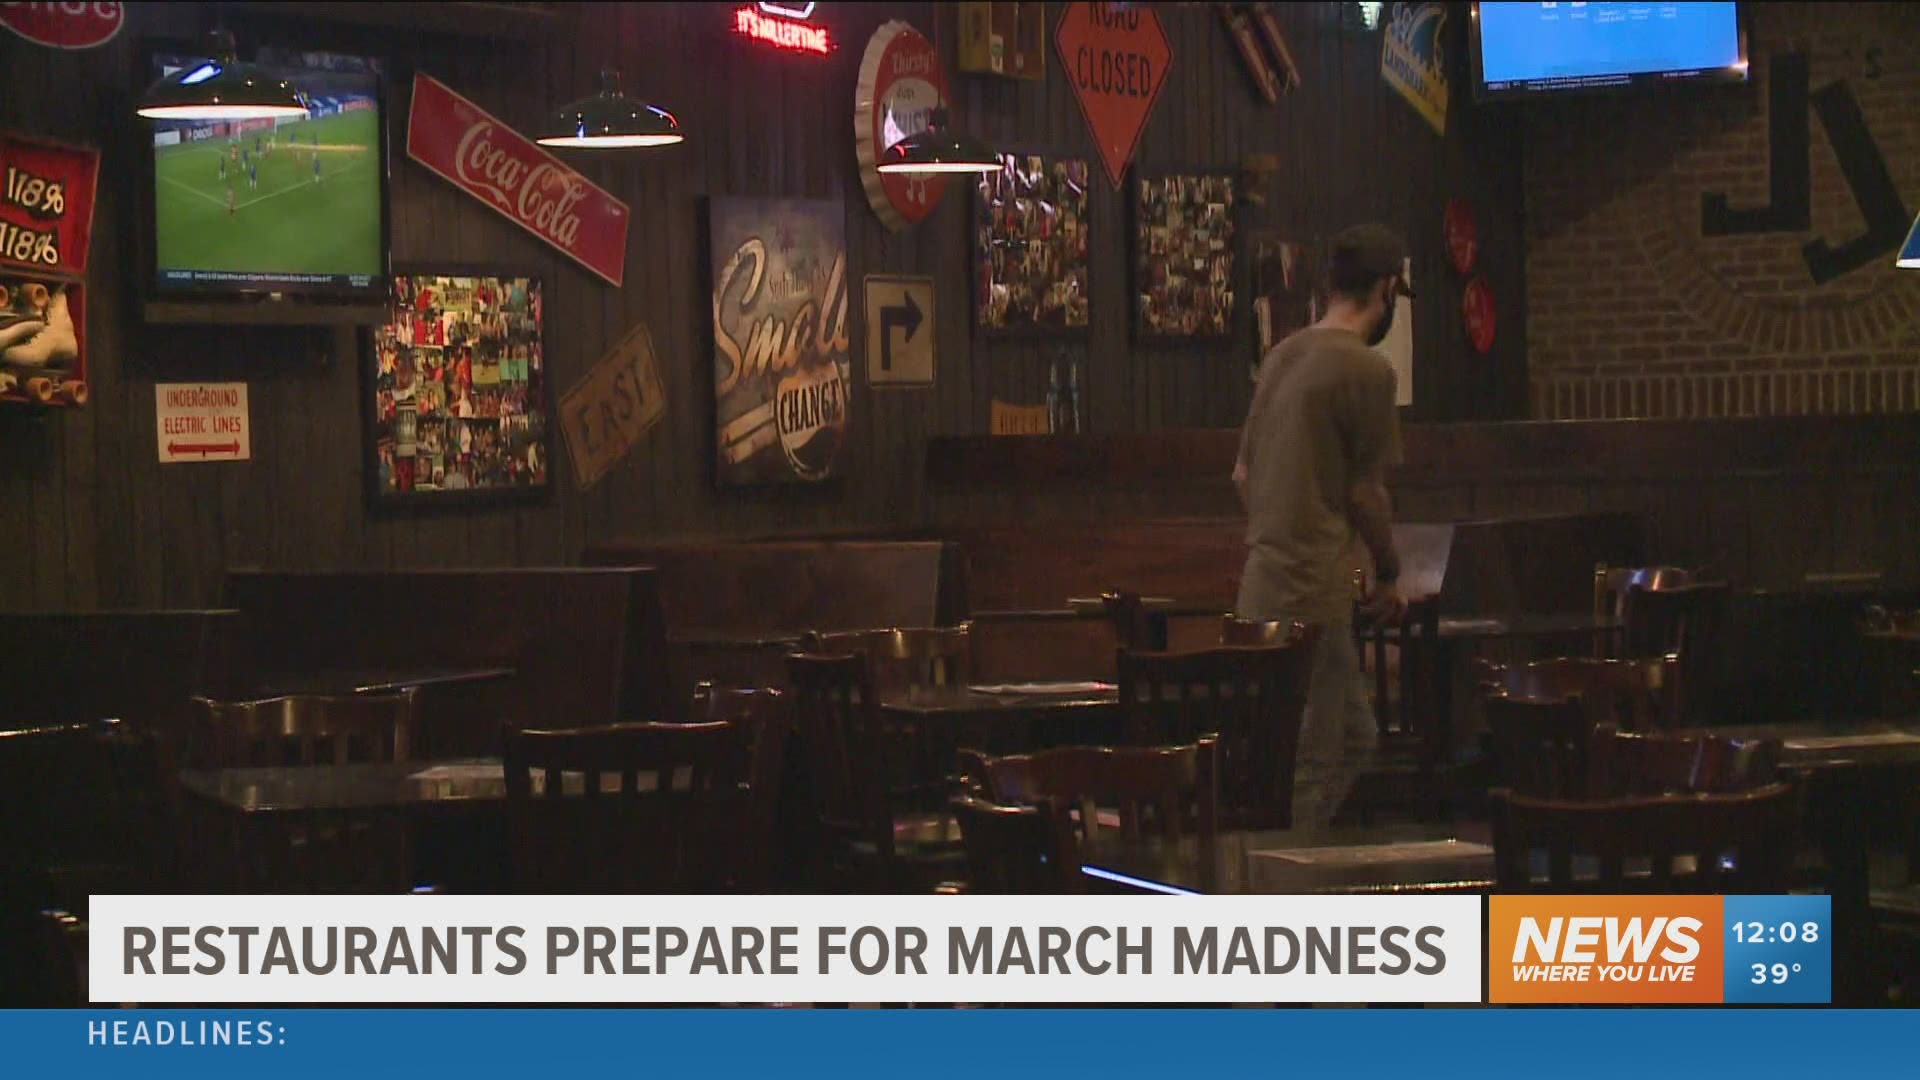 As sports bars plan for the big weekend they’re preparing to cheer on those hogs but also to keep people safe.